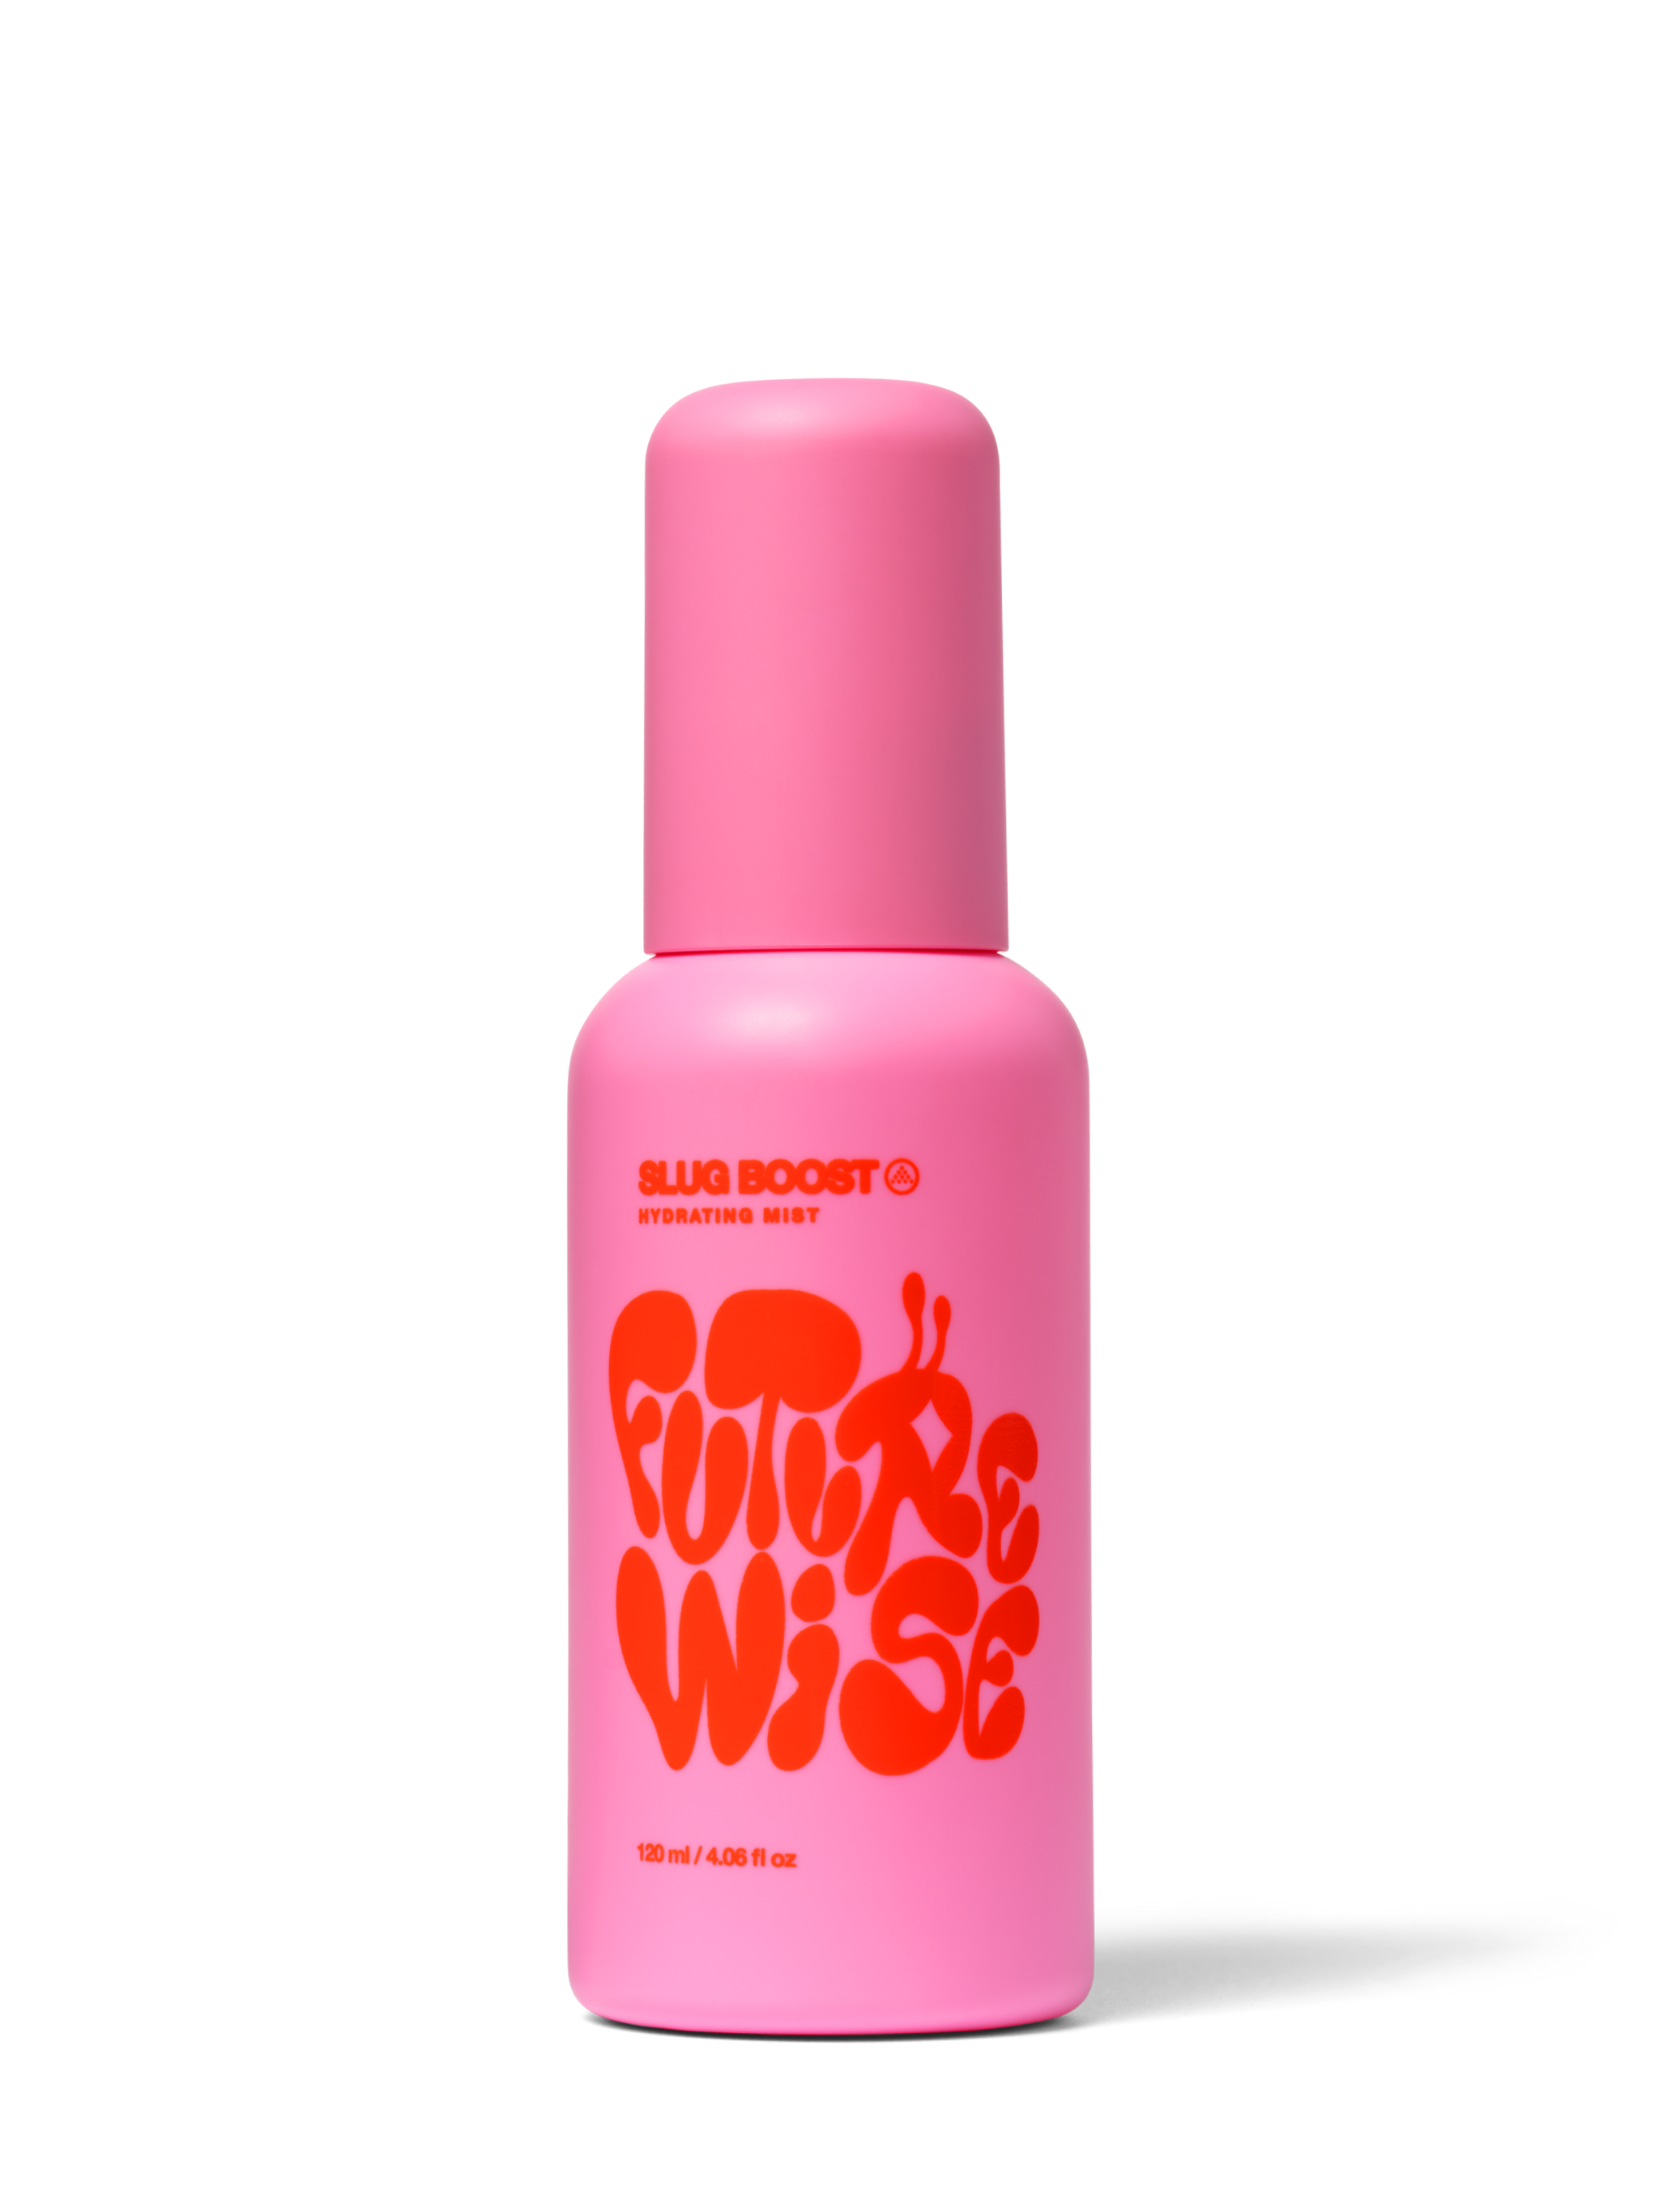 Front facing studio shot of the Slug Boost product, a pink bottle with red text featuring the Futurewise logo